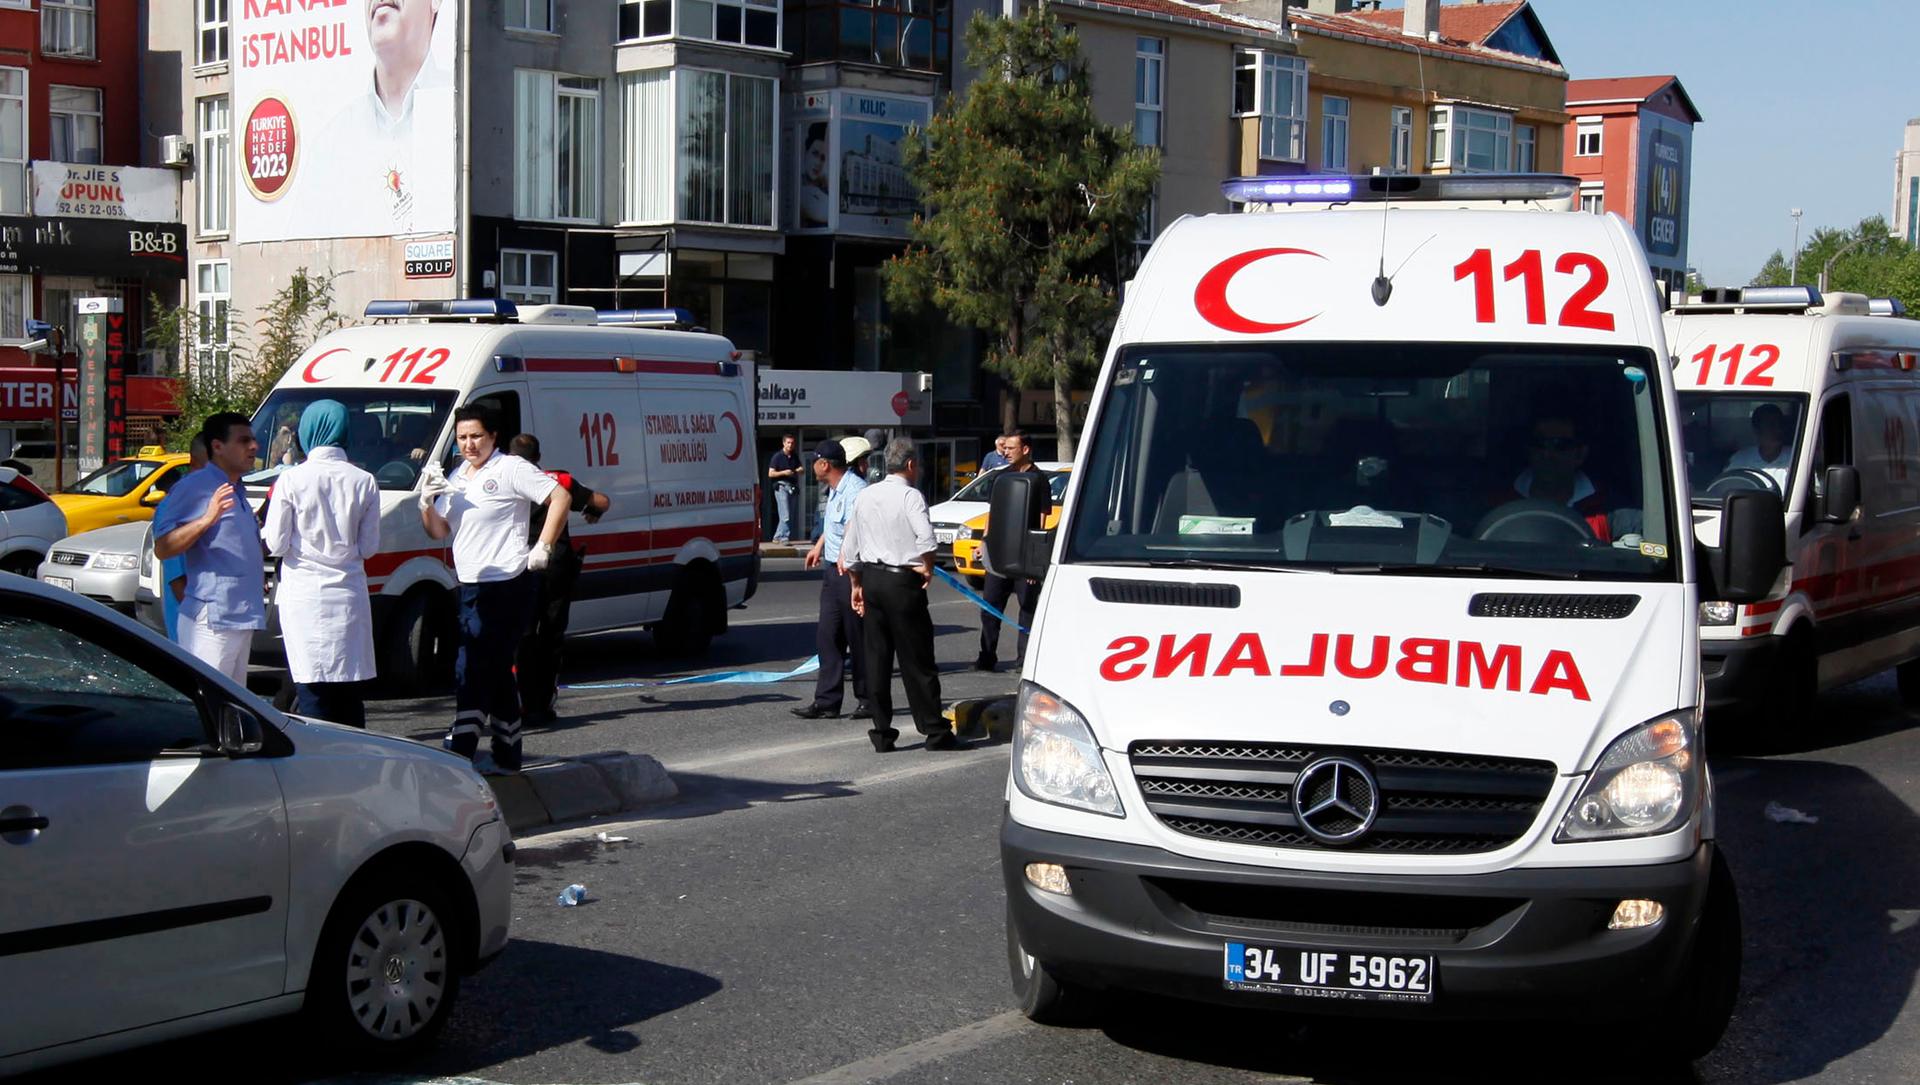 Ambulances arrive following an explosion in Istanbul.